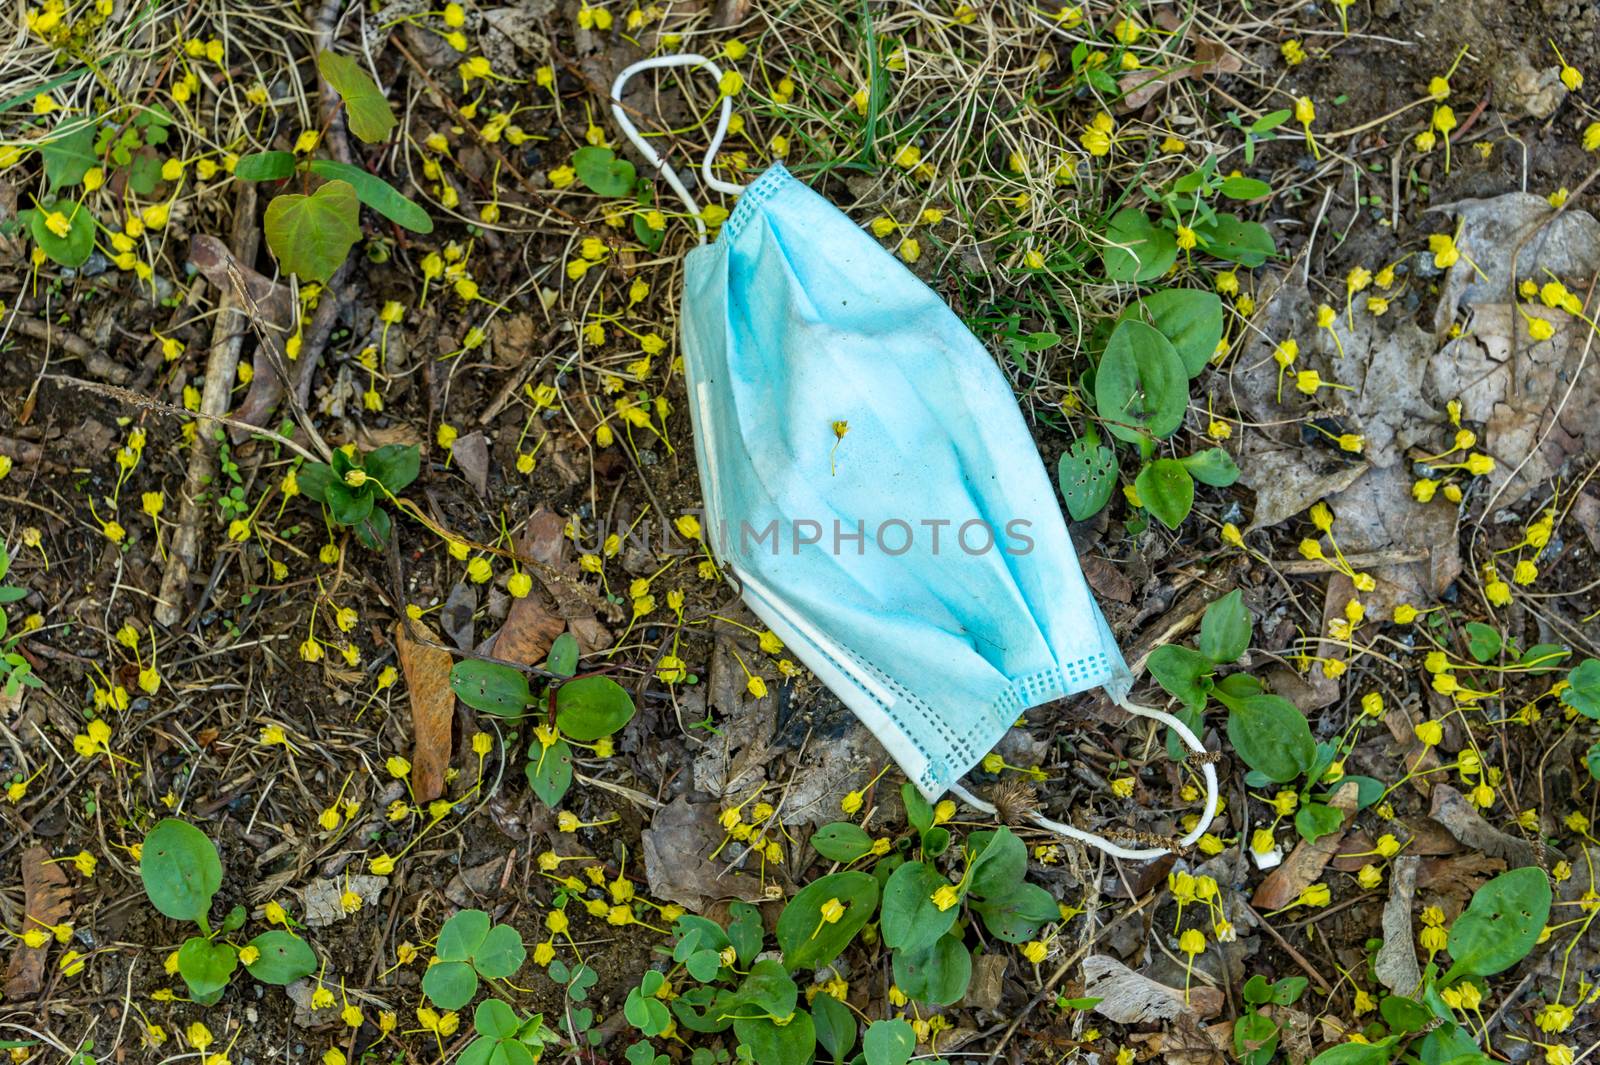 Discarded face mask dumped on the ground during the Covid-19 pandemic